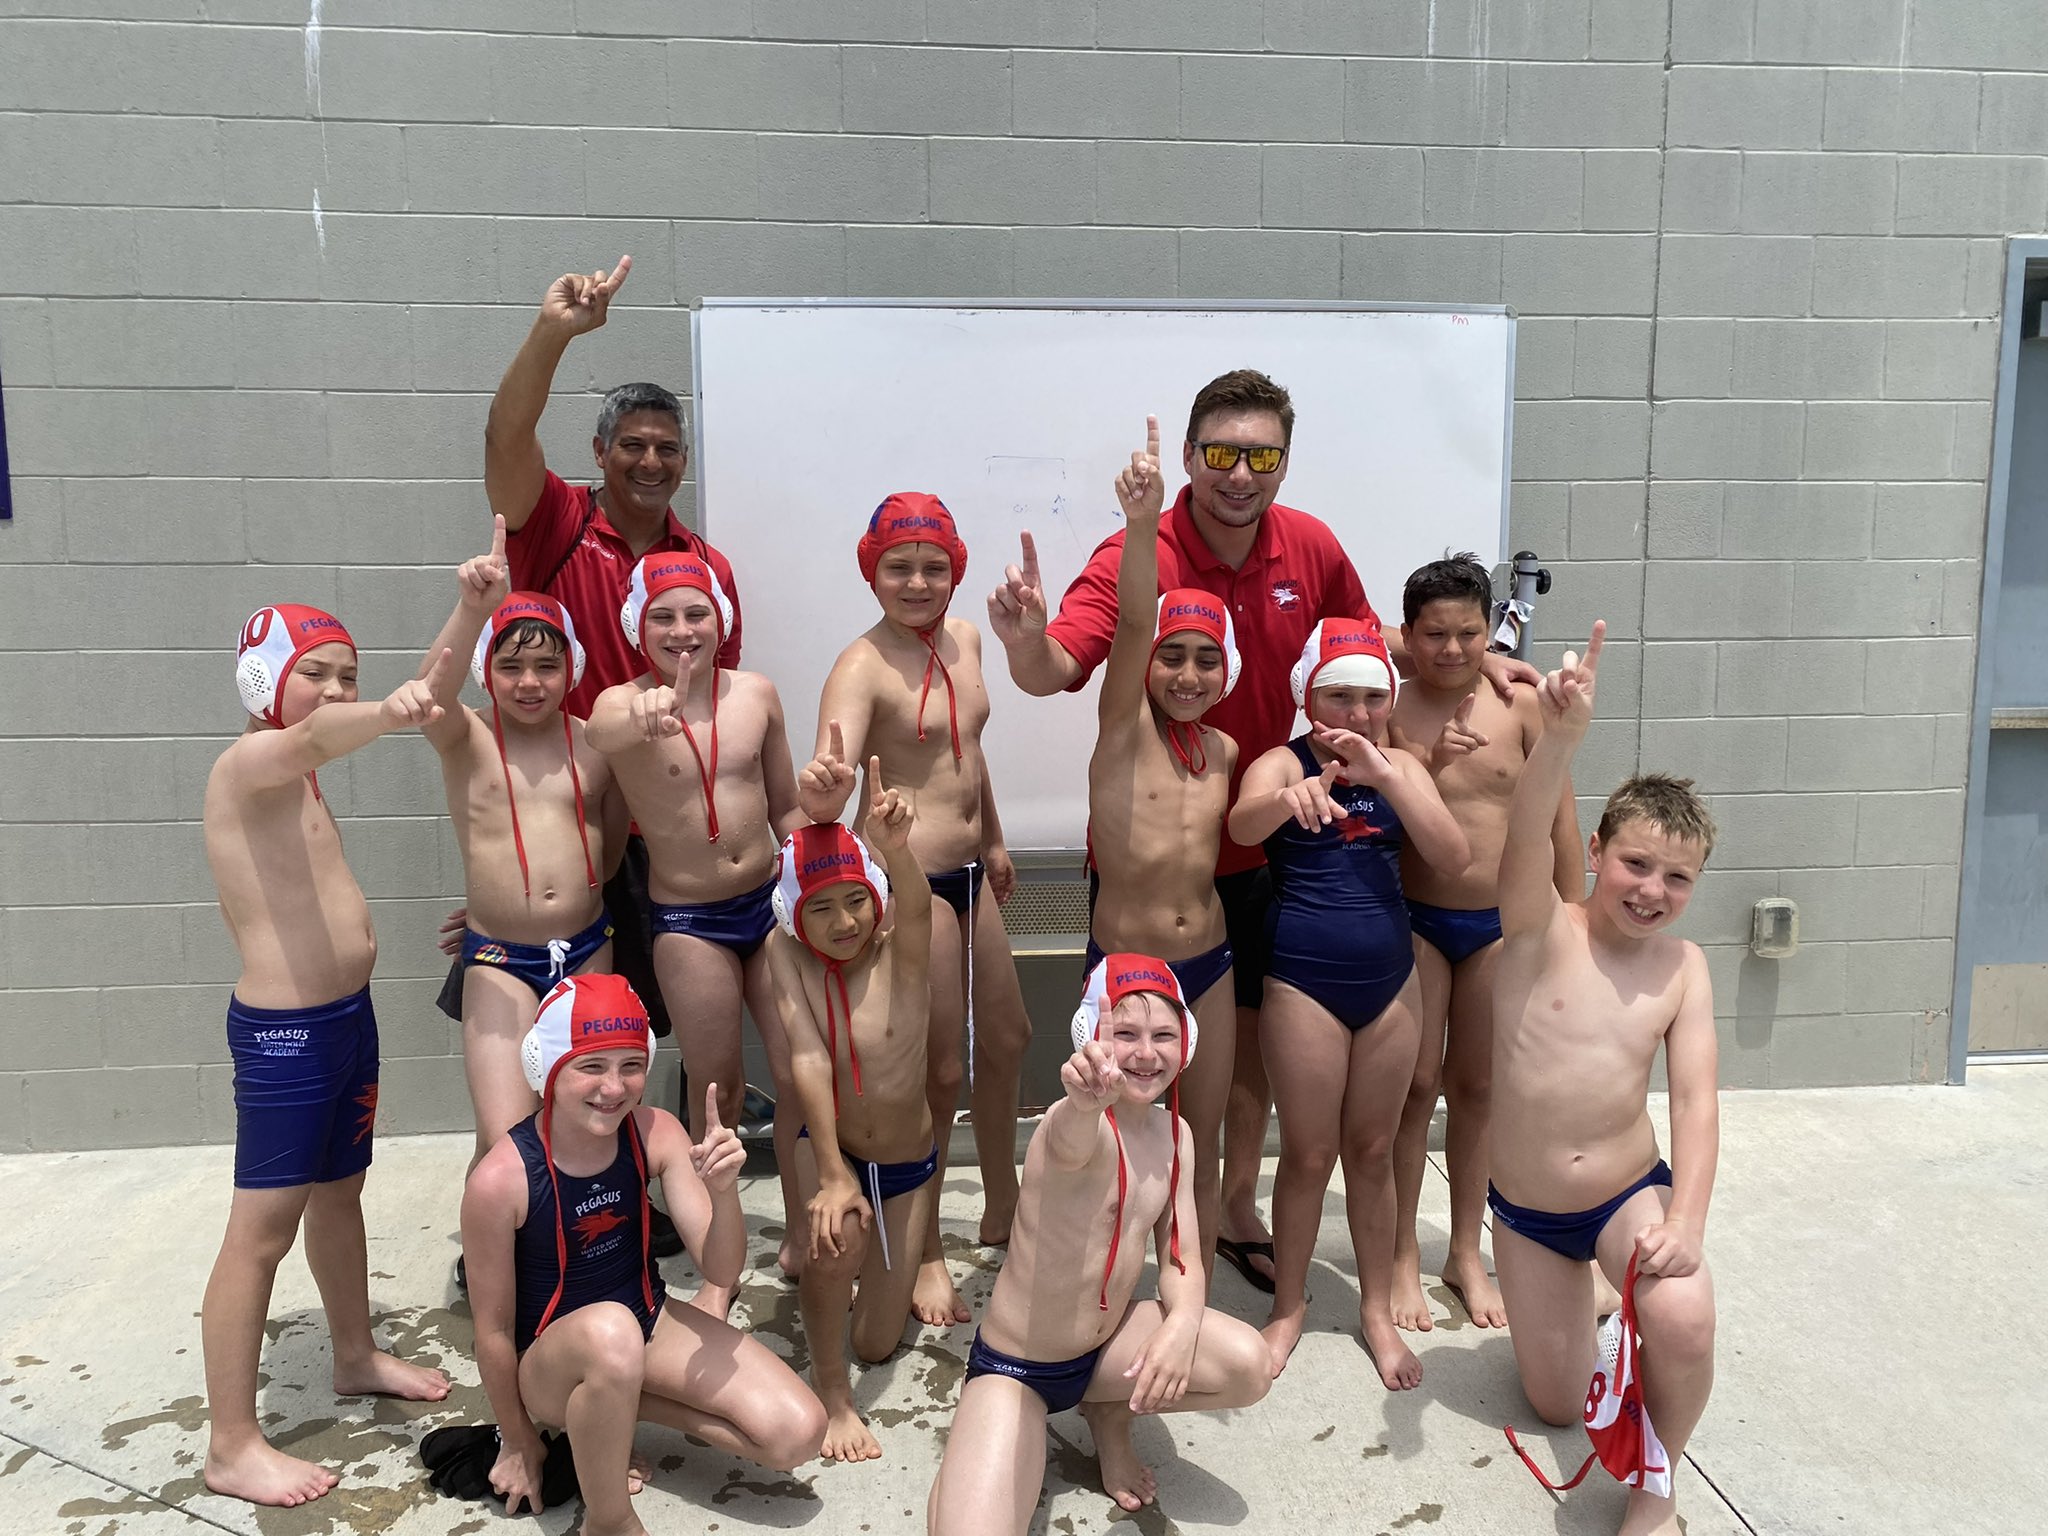 Champions Crowned at the 2022 Texas Age Group State (TAGS